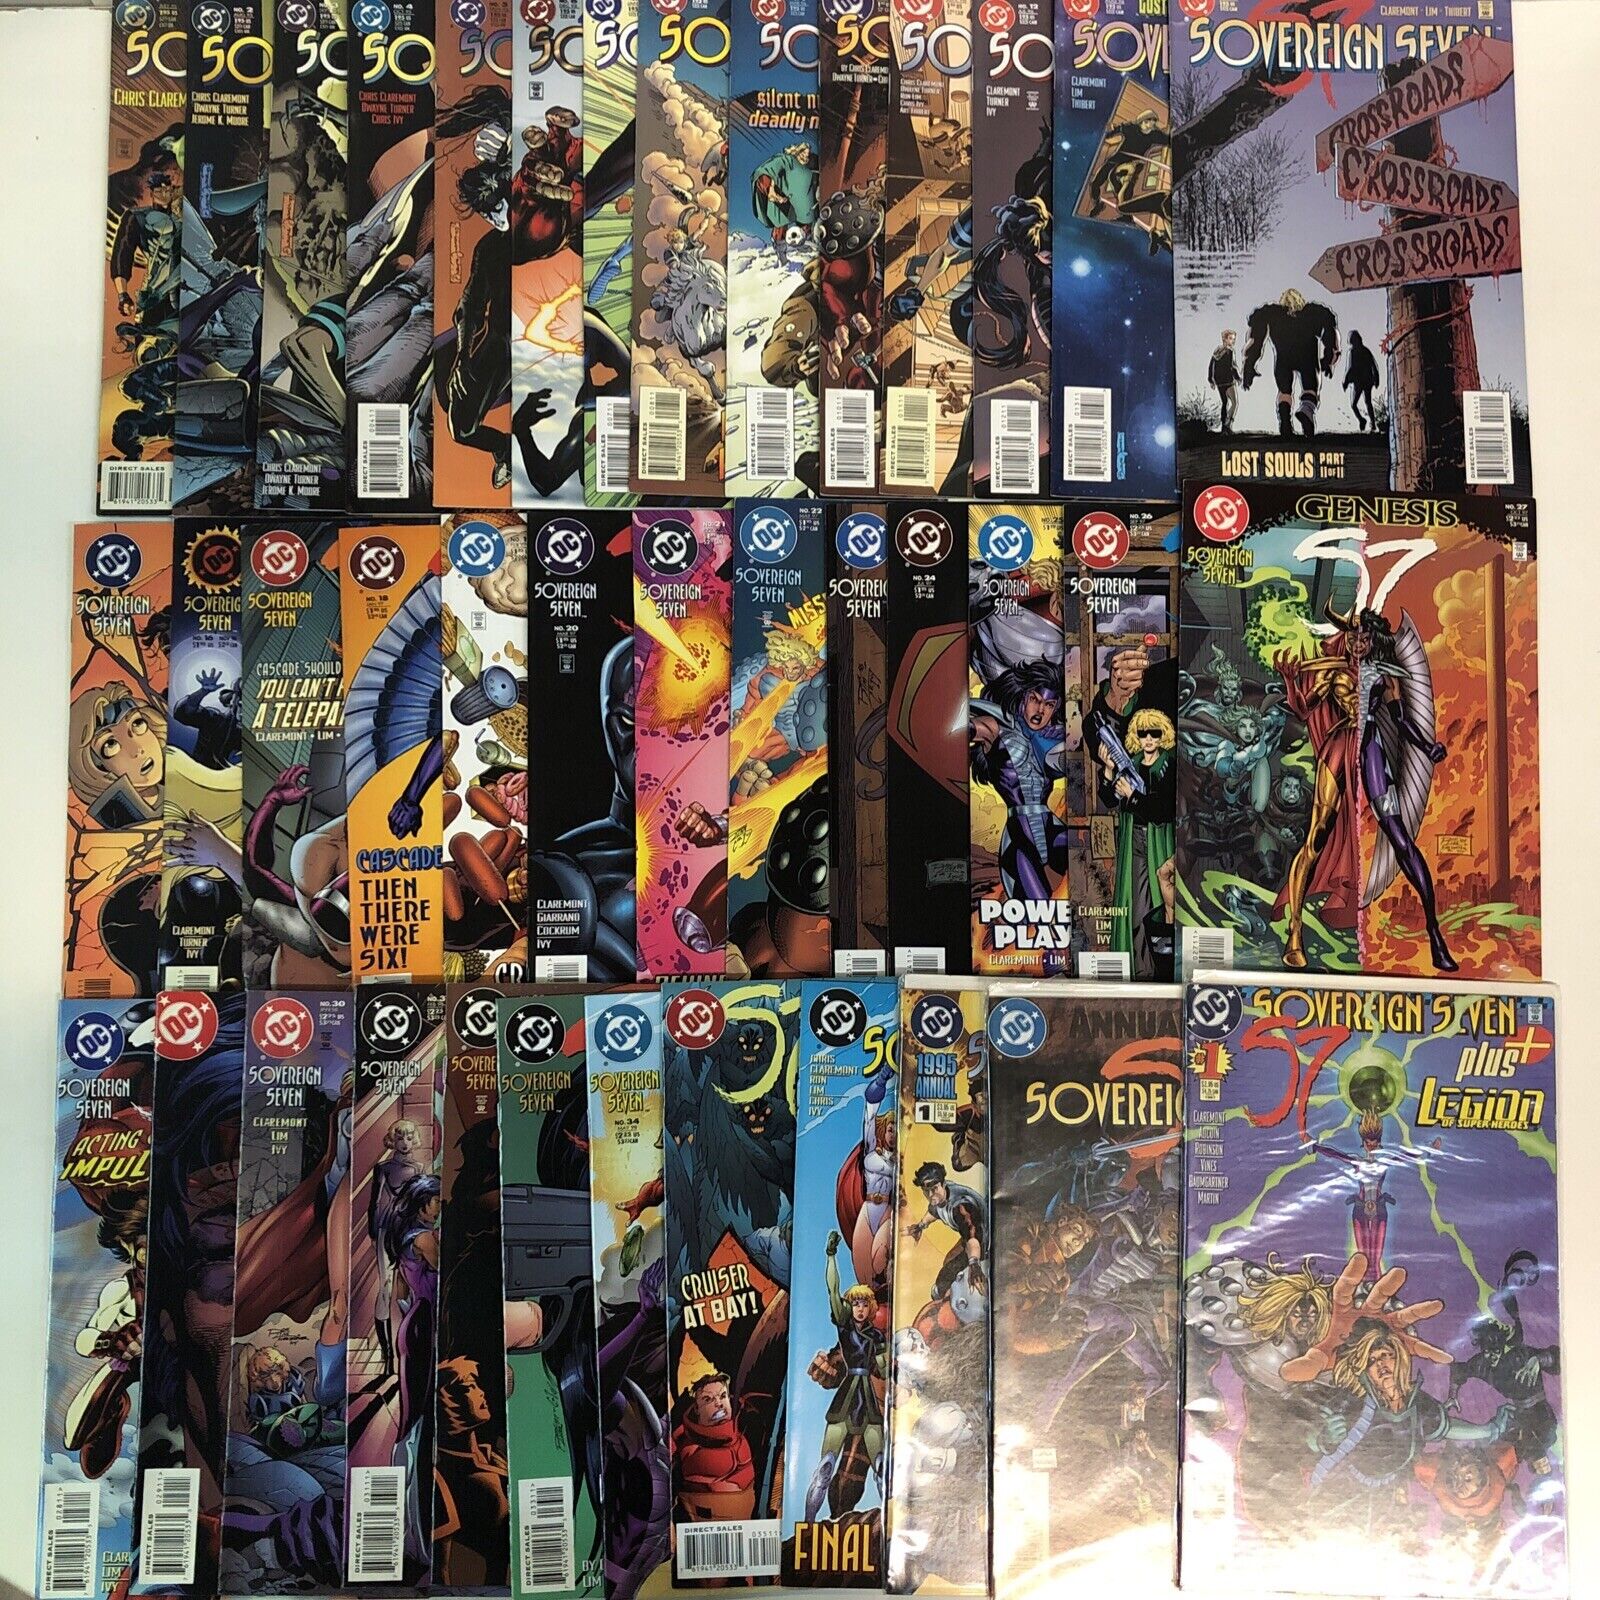 Sovereign Seven (1995) Complete Set # 1-36 & Annual # 1-2 & Plus # 1 (VF/NM) DC